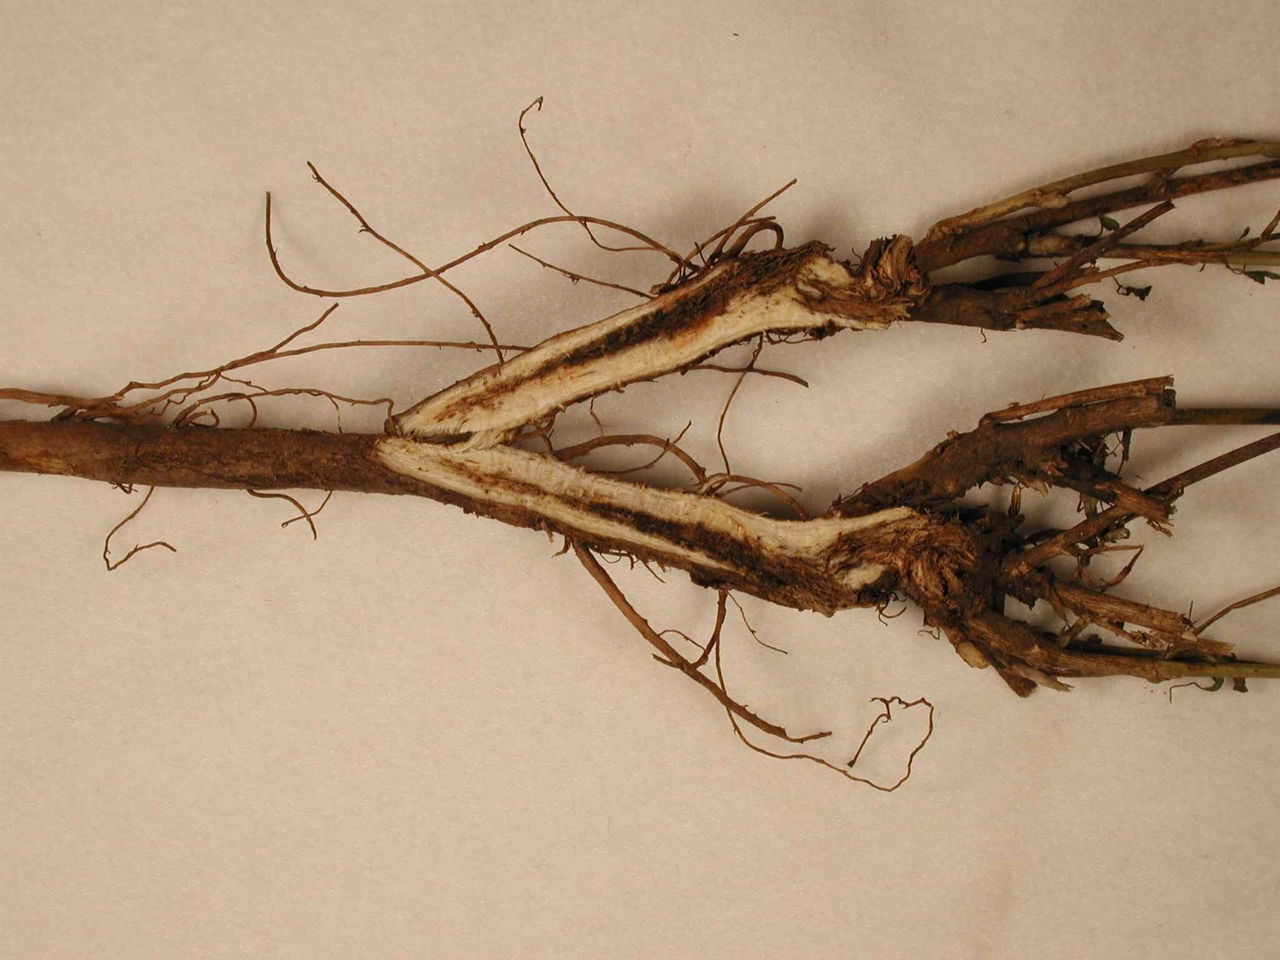 Decayed root tissue caused by Mycoleptodiscus Crown and Root Rot.